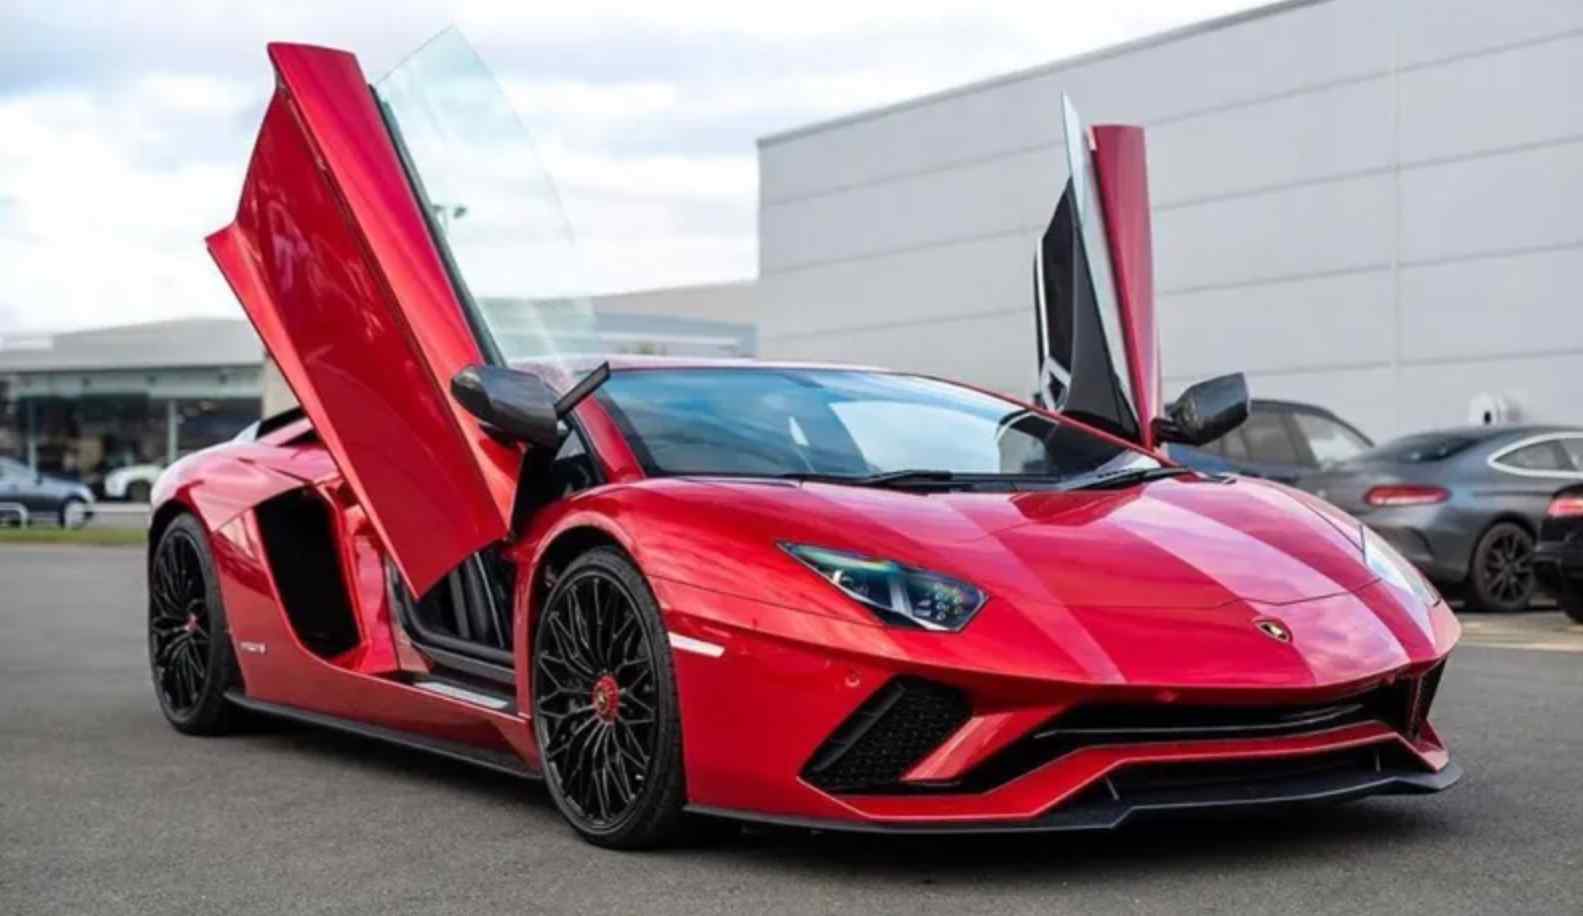 For those seeking an adrenaline-fueled experience in car hire in Dubai, renting a Lamborghini offers the ultimate thrill.